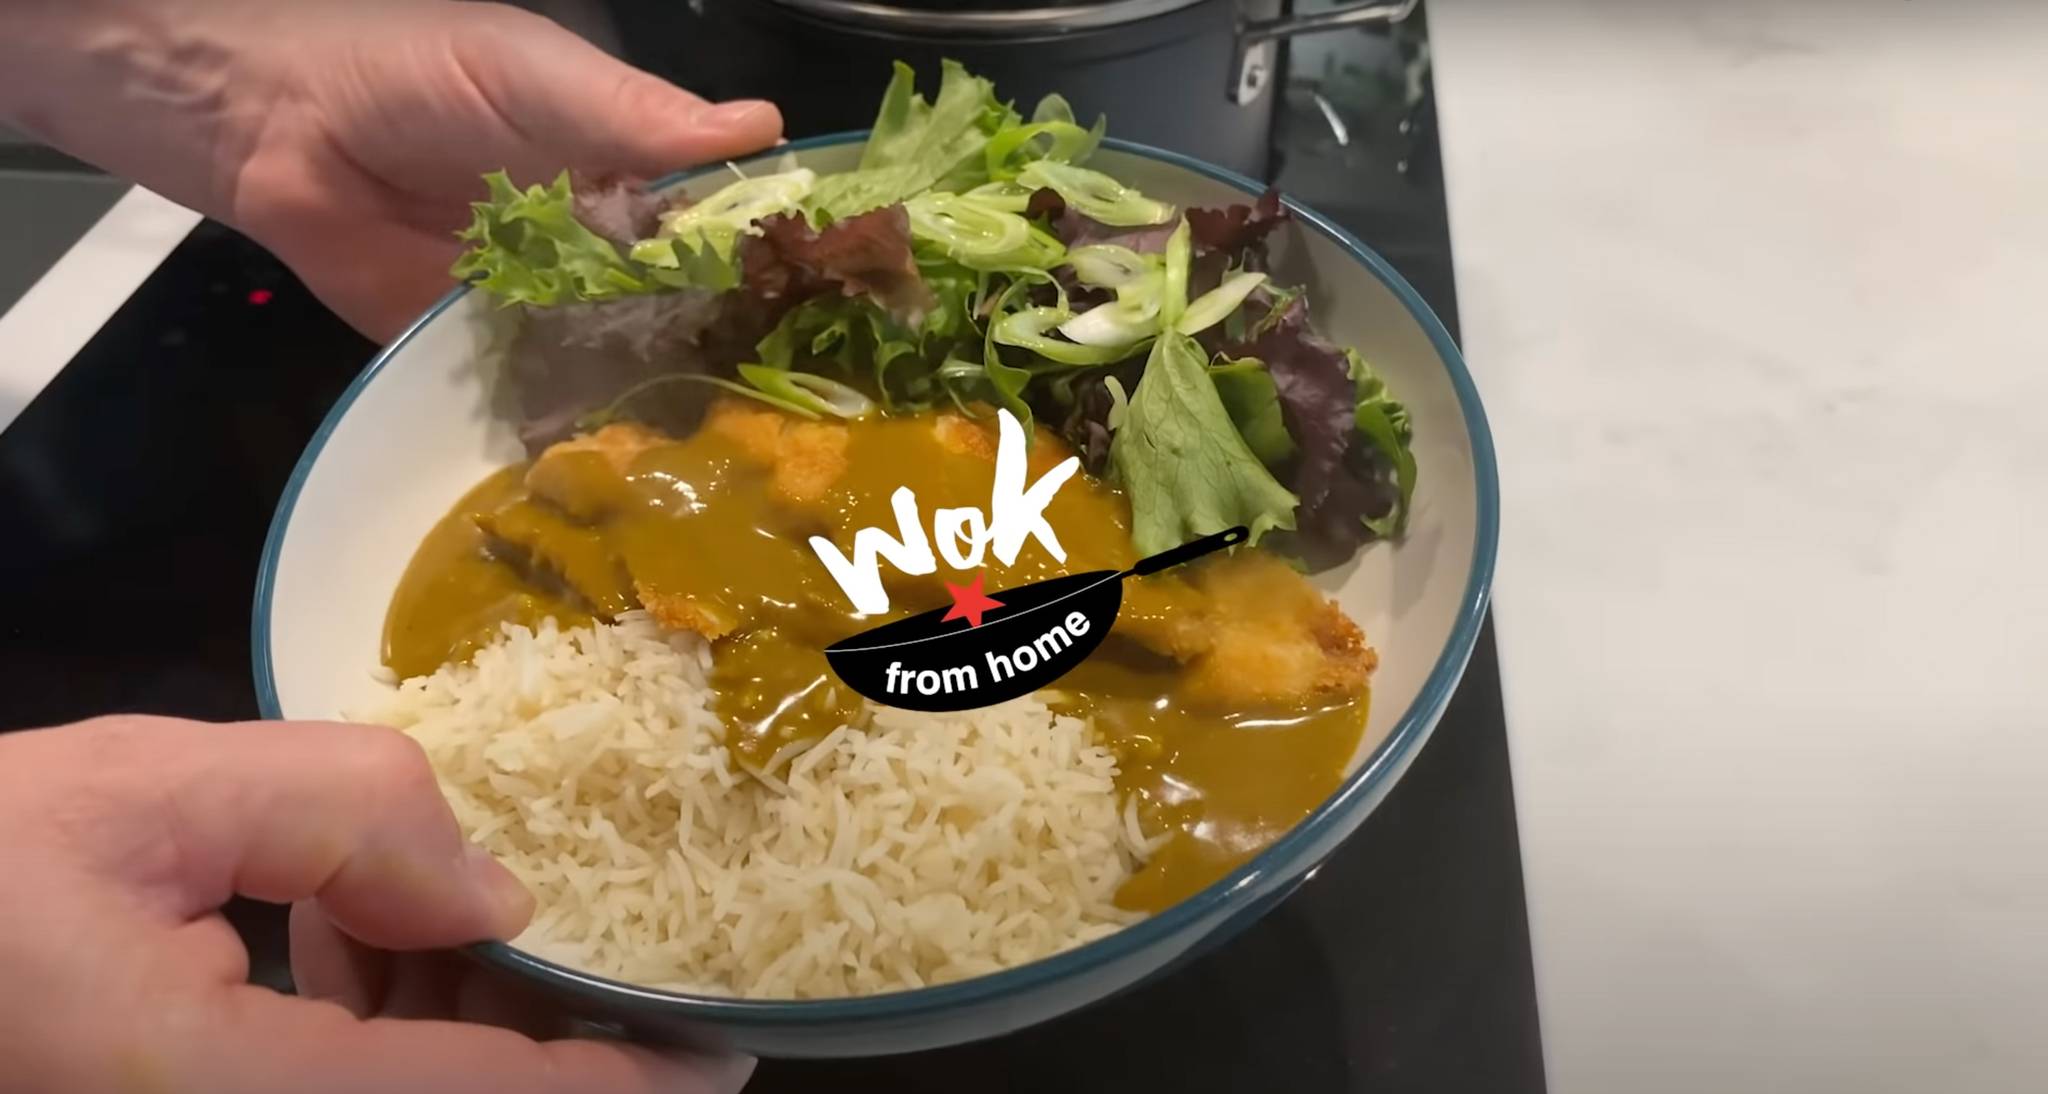 Wagamama meal kits: tapping creative chefs